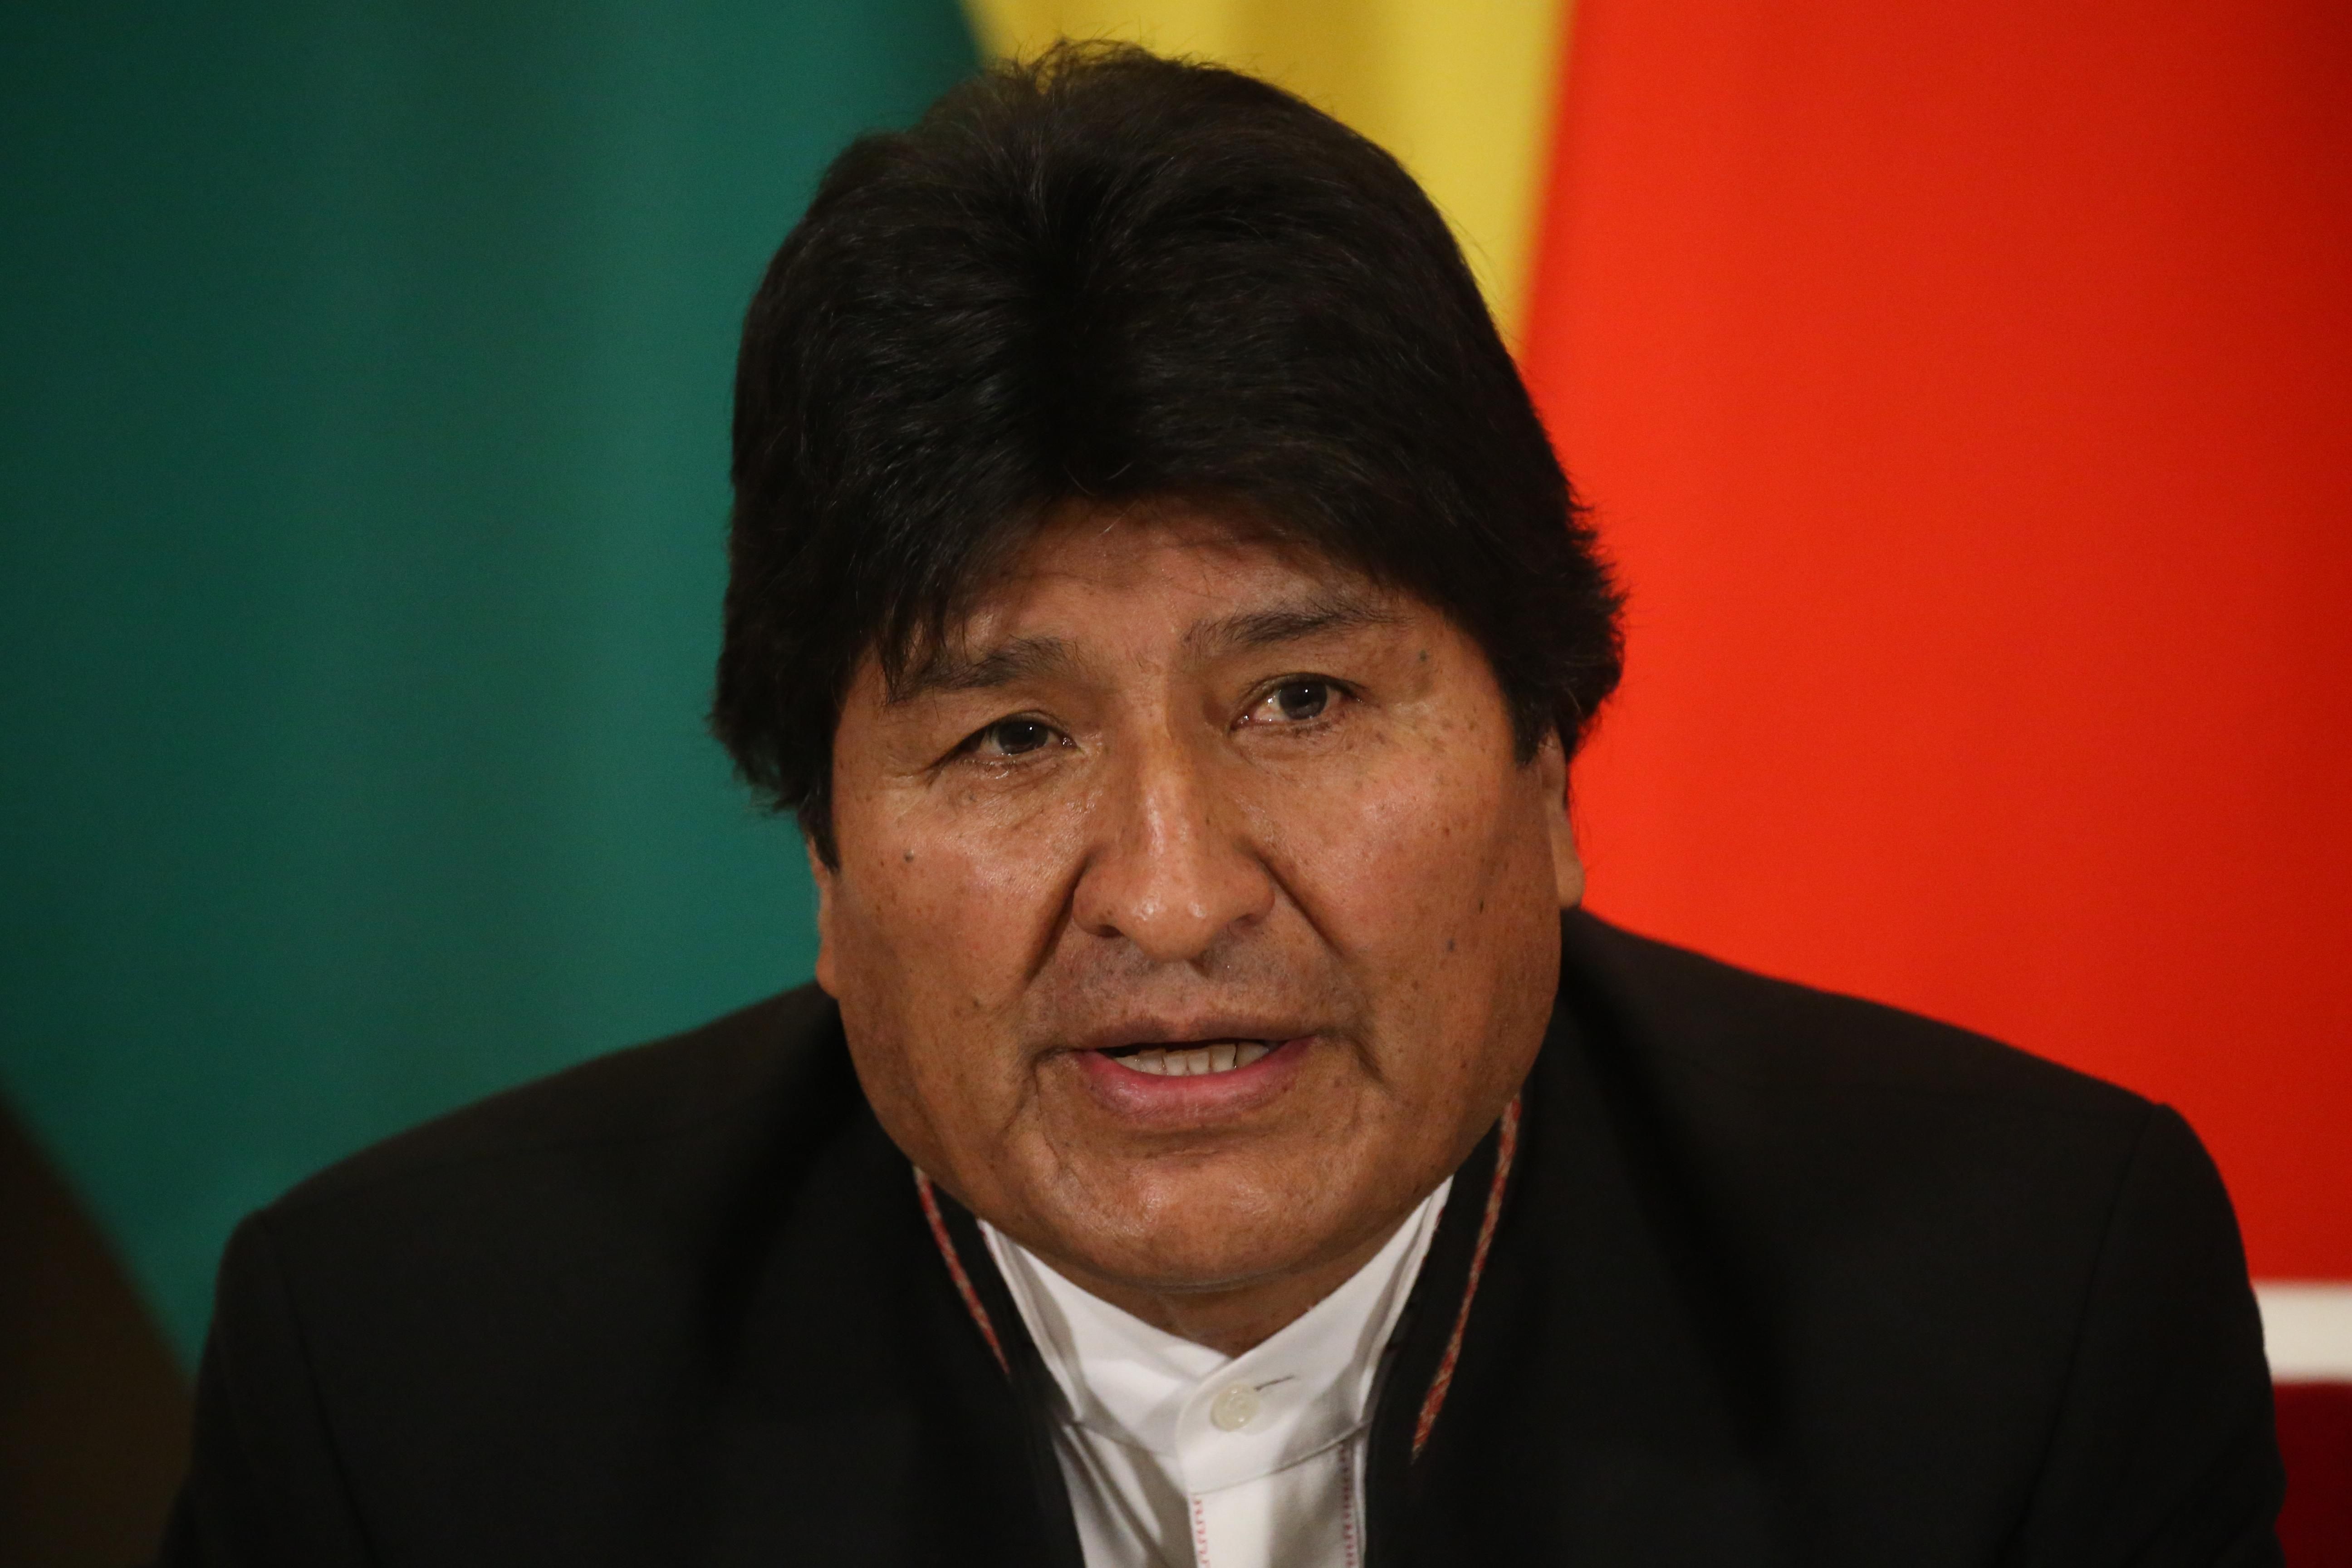 Response by the ideologically leftwing government of Evo Morales has been forced, instead, largely due to domestic pressure by Bolivians that increasingly view the response as not only as too little too late, but also directly blame Morales’ pro-development policies for ongoing destruction of the Amazon. (Photo by Mikhail Svetlov/Getty Images)